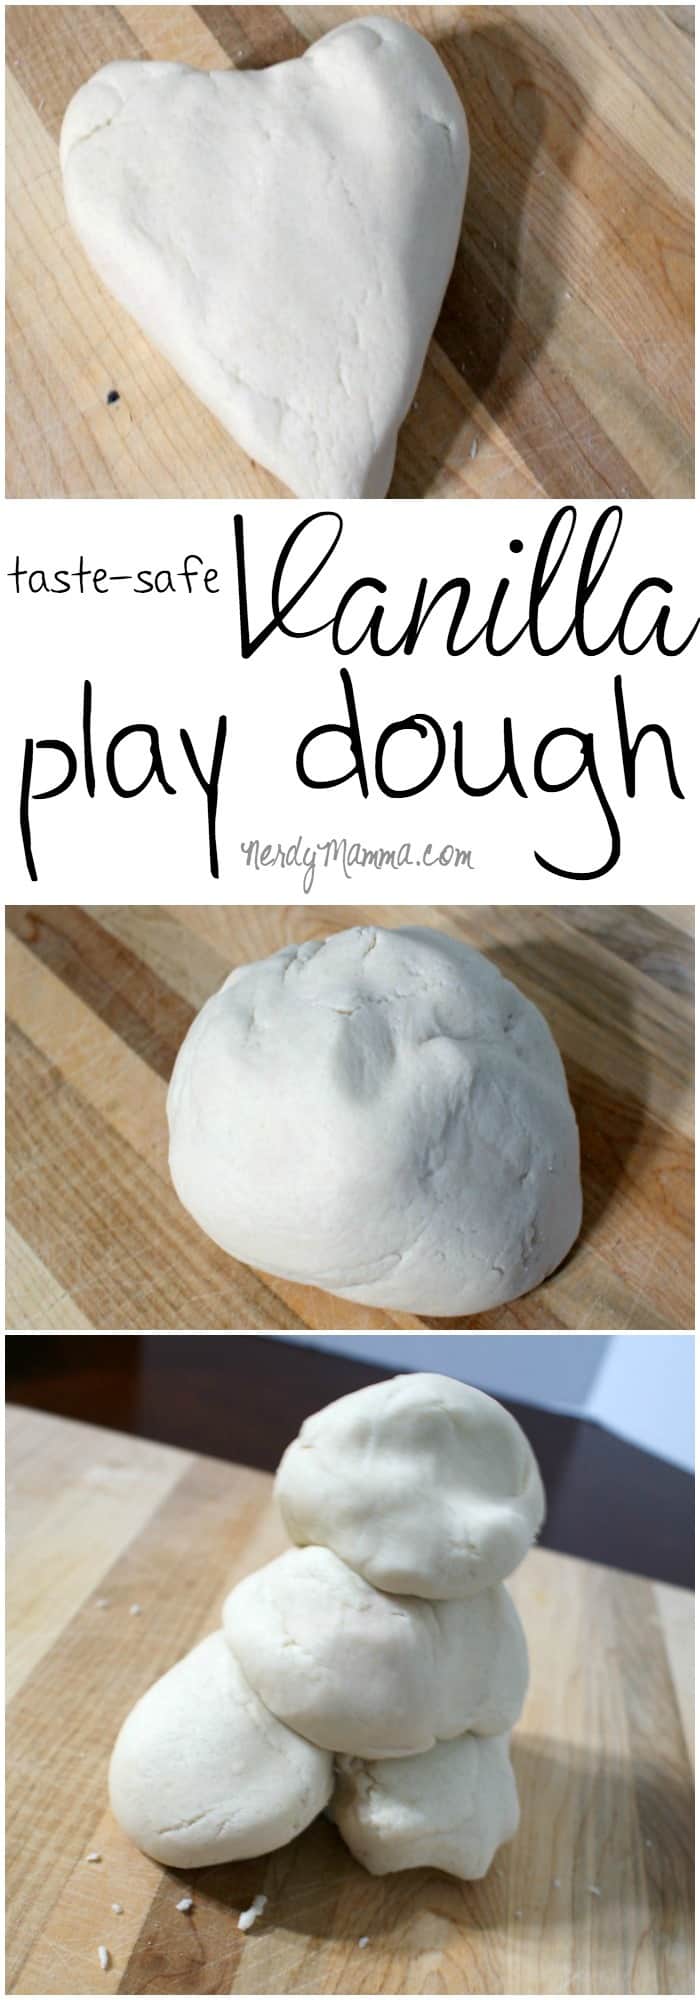 This recipe for taste-safe vanilla play dough is so ridiculously yummy smelling. I think it smells just like a nice cookie dough I want to EAT! LOL!